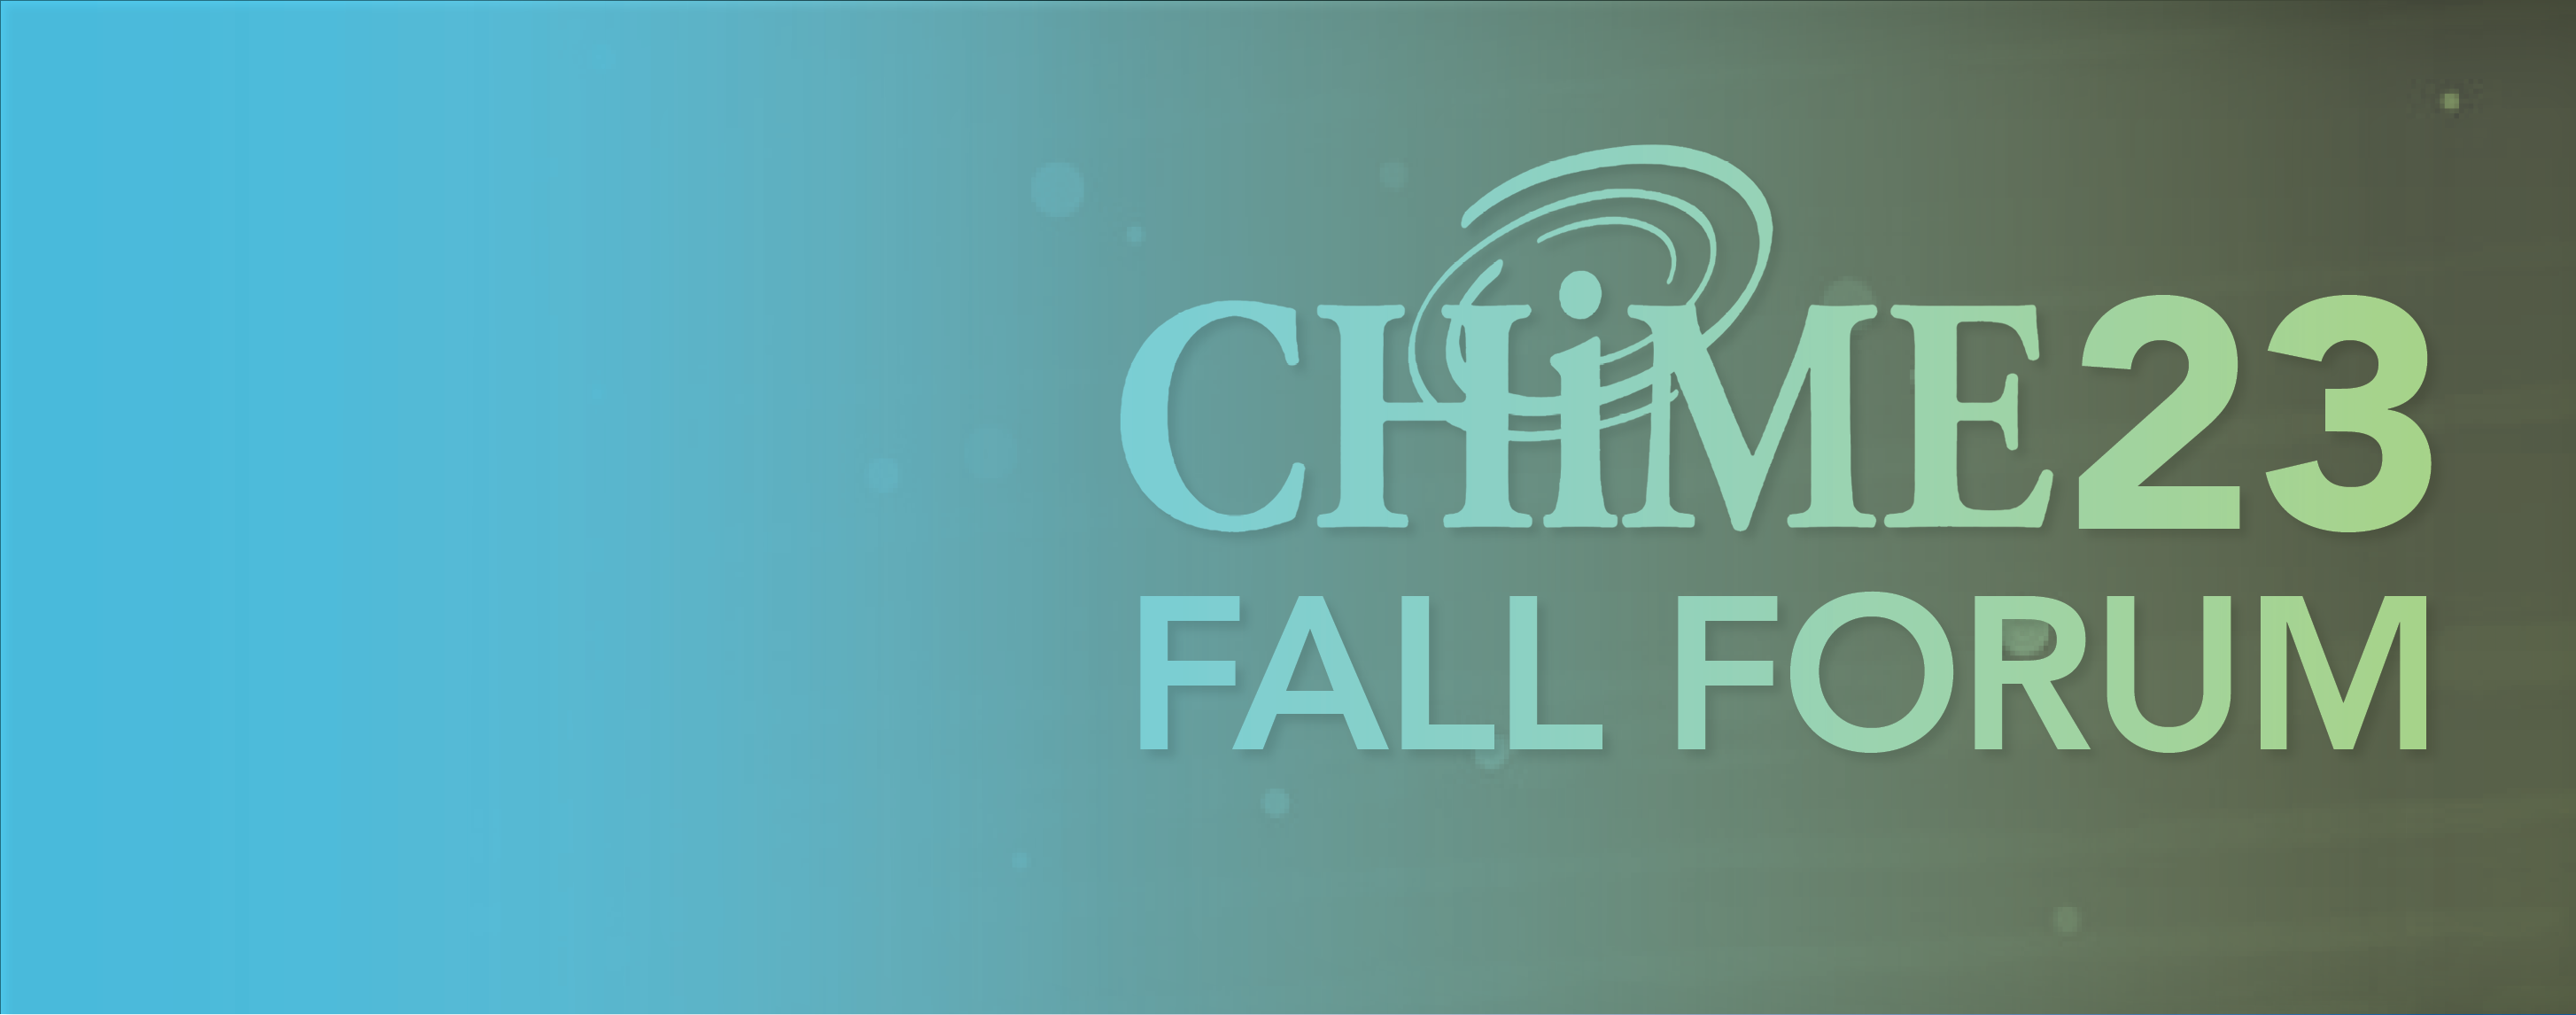 TeleVox Explores How Digital Transformation and Conversational AI Are Changing Patient Engagement at CHIME23 Fall Forum